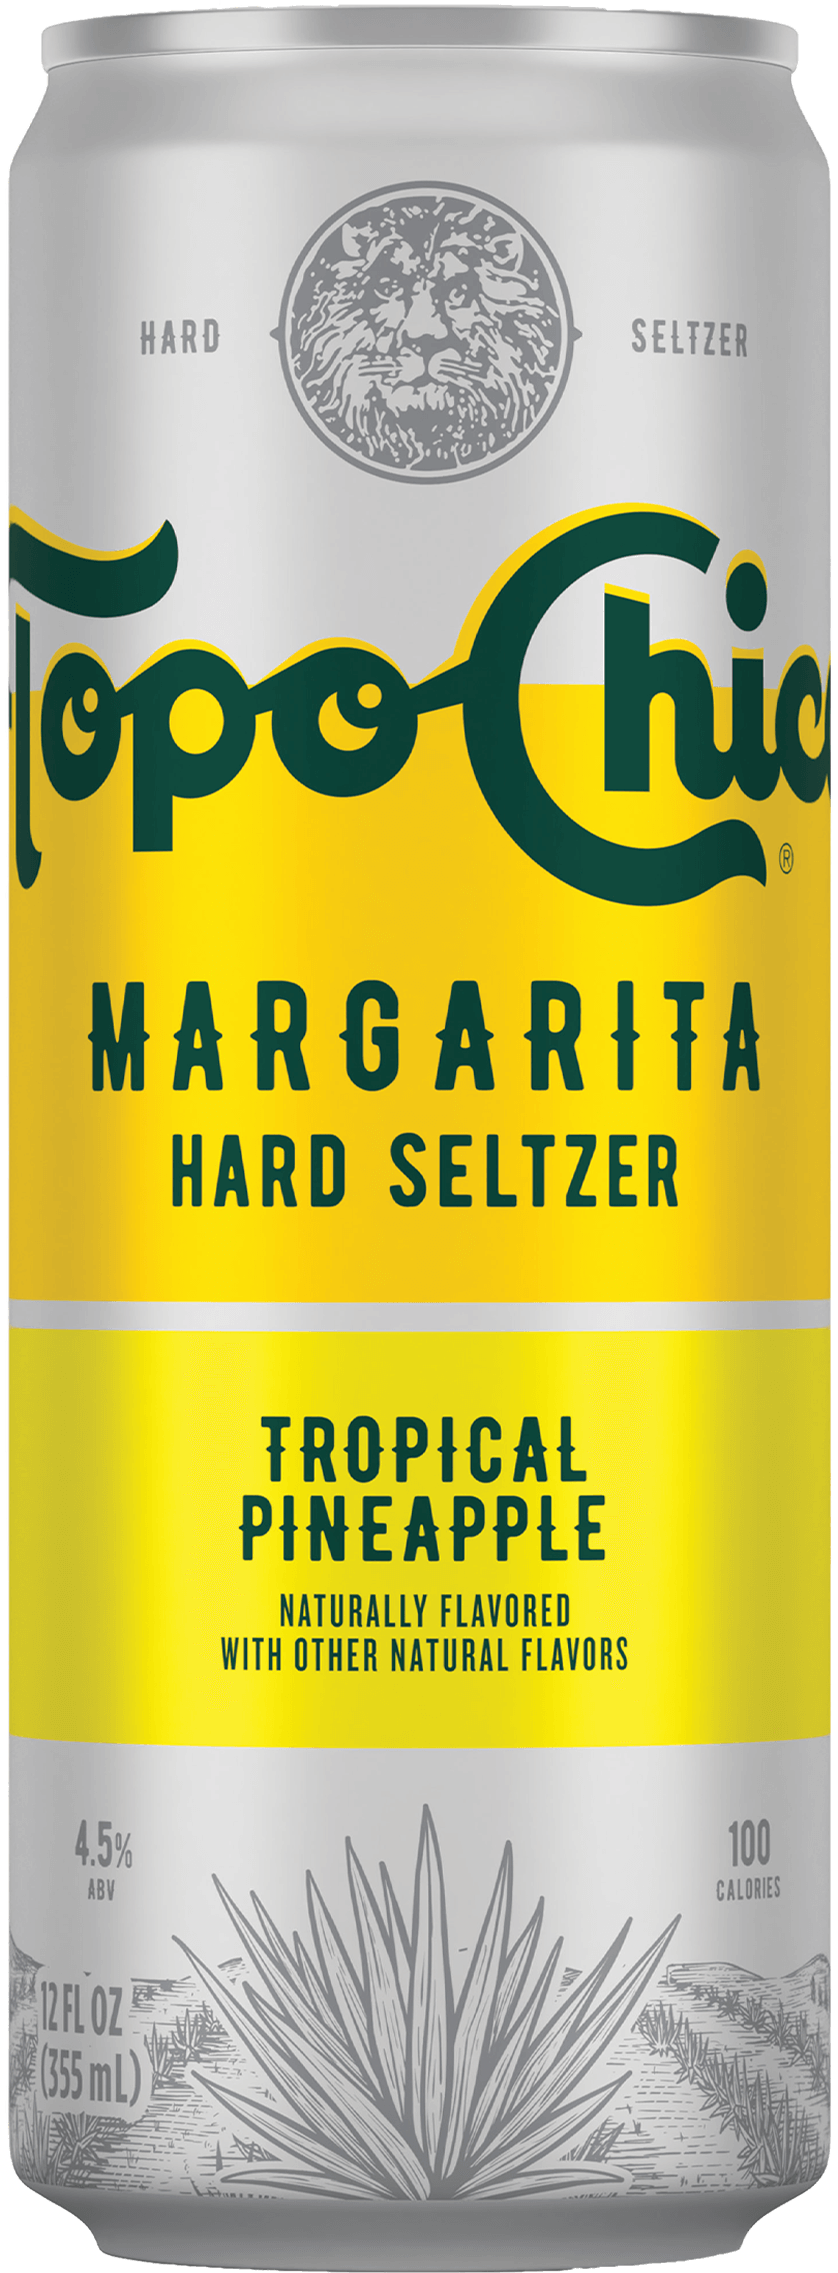 Tropical Pineapple can